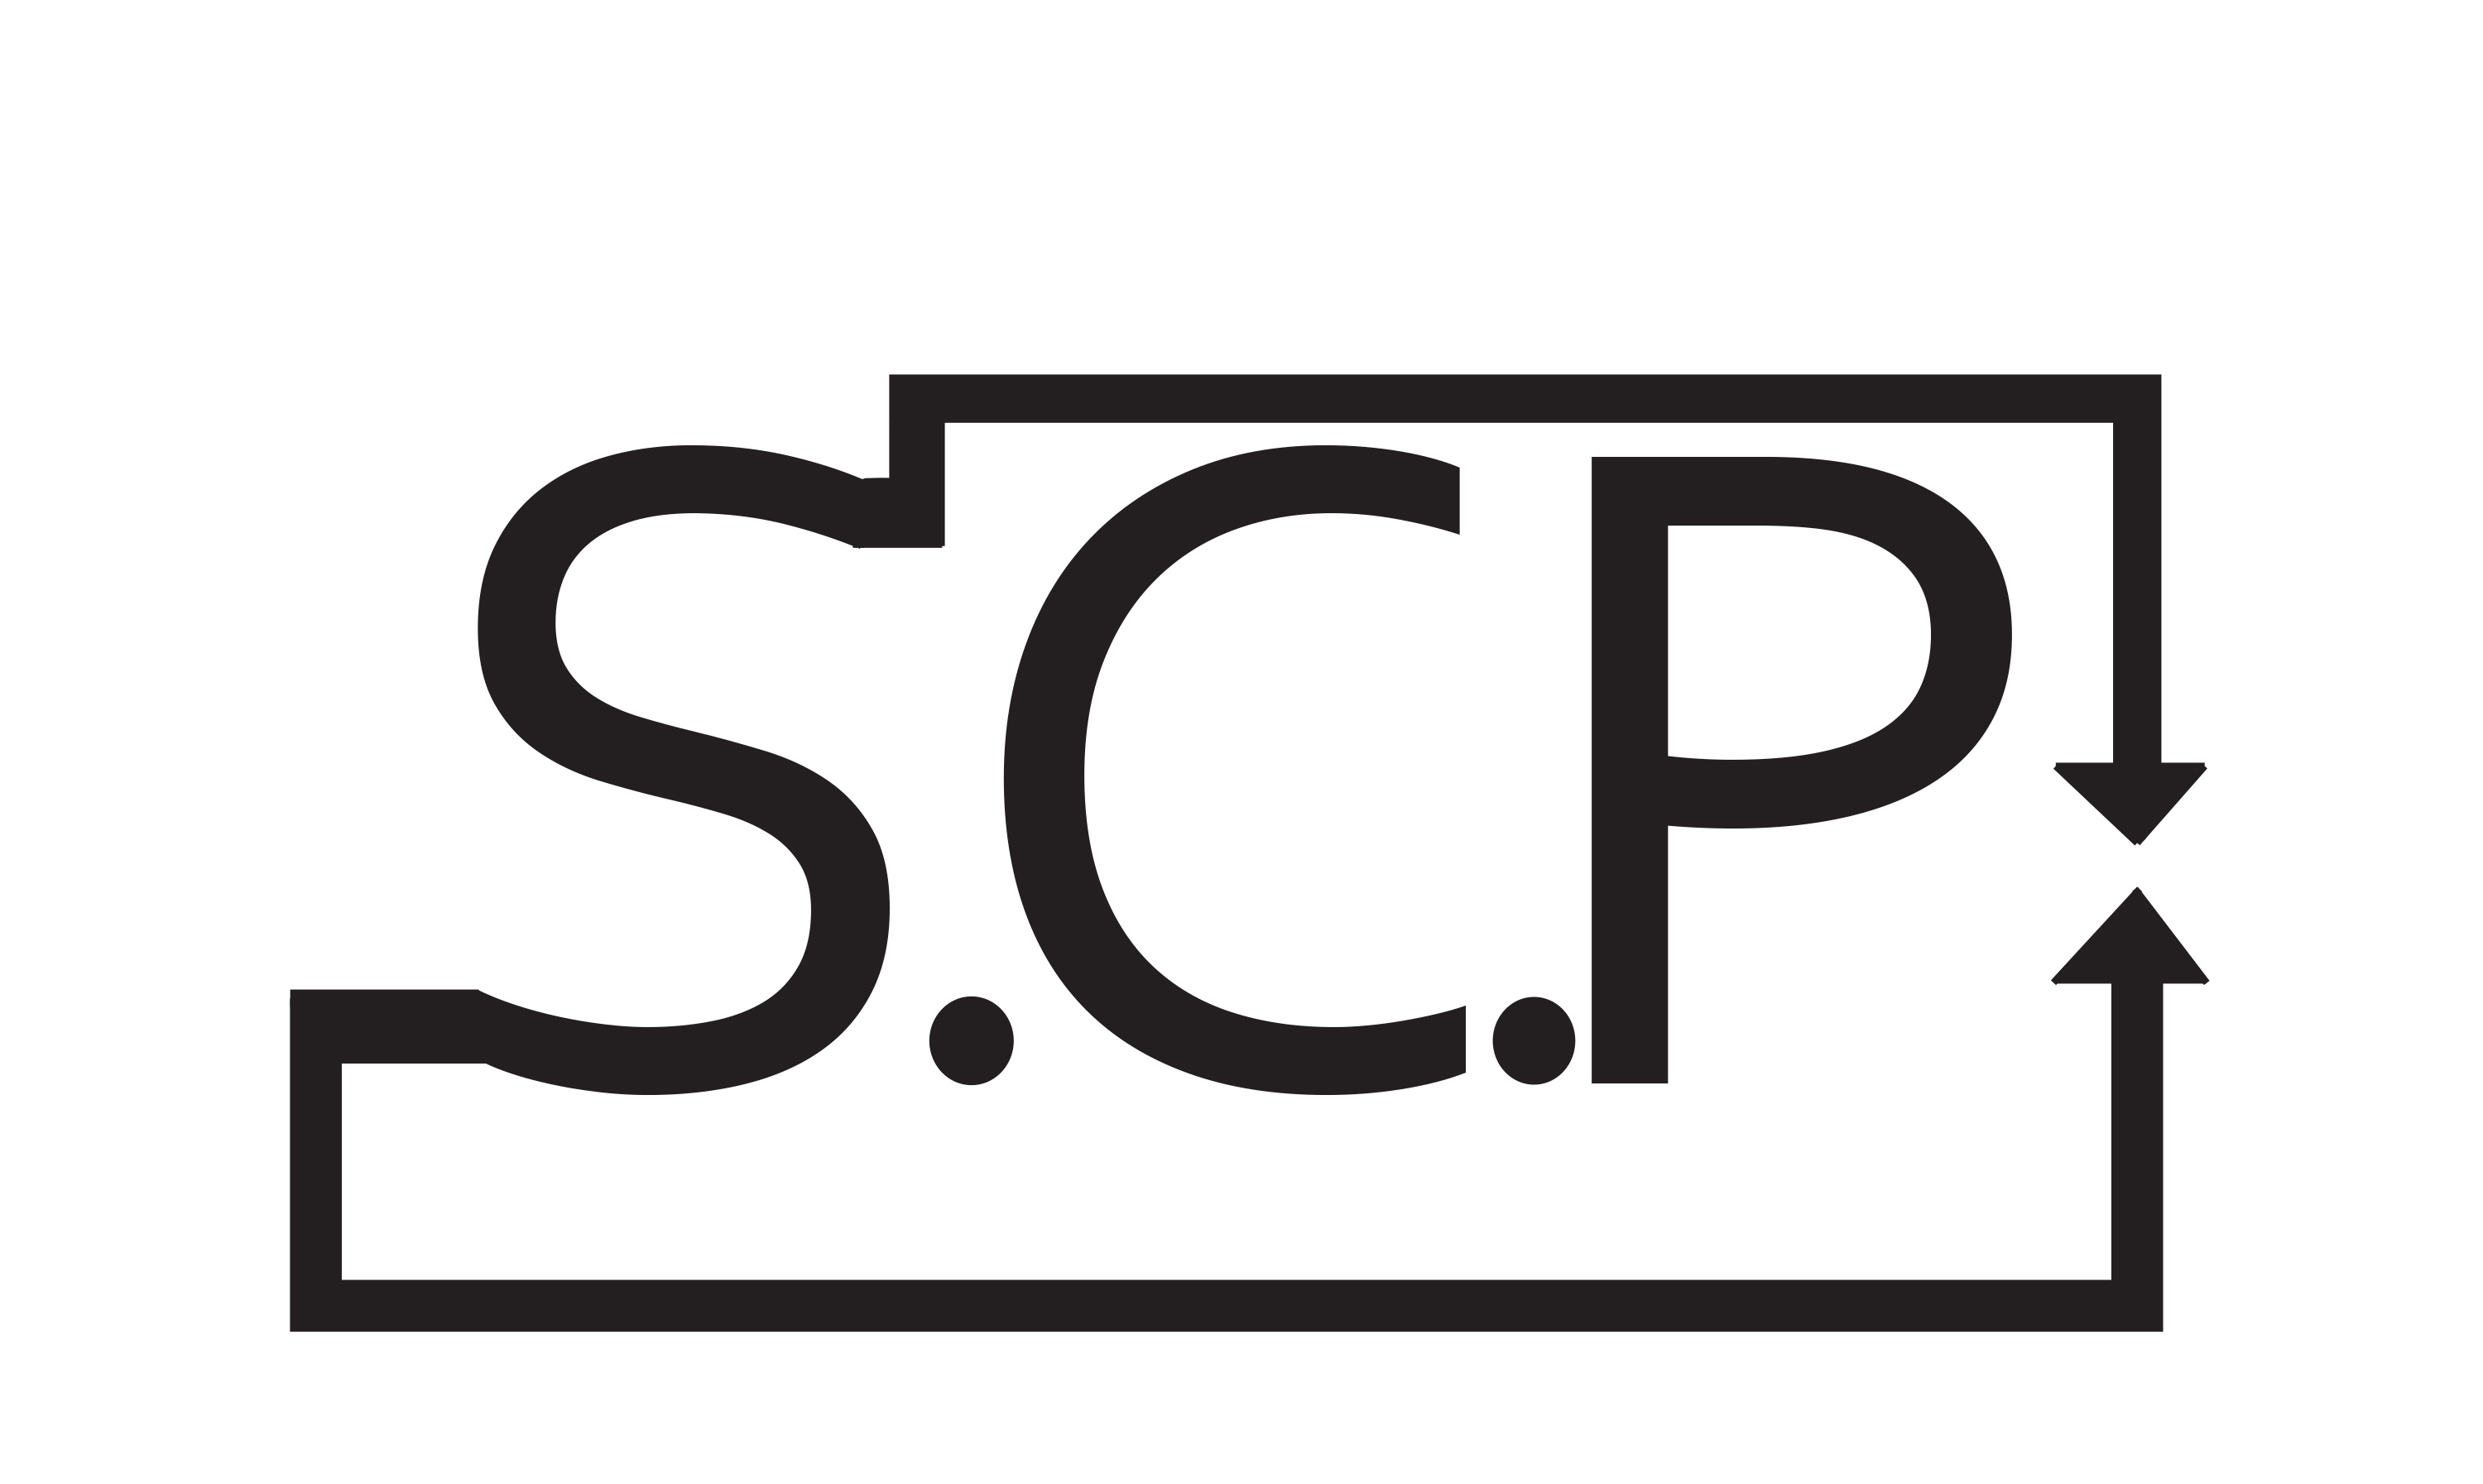 scp logo file download photoshop